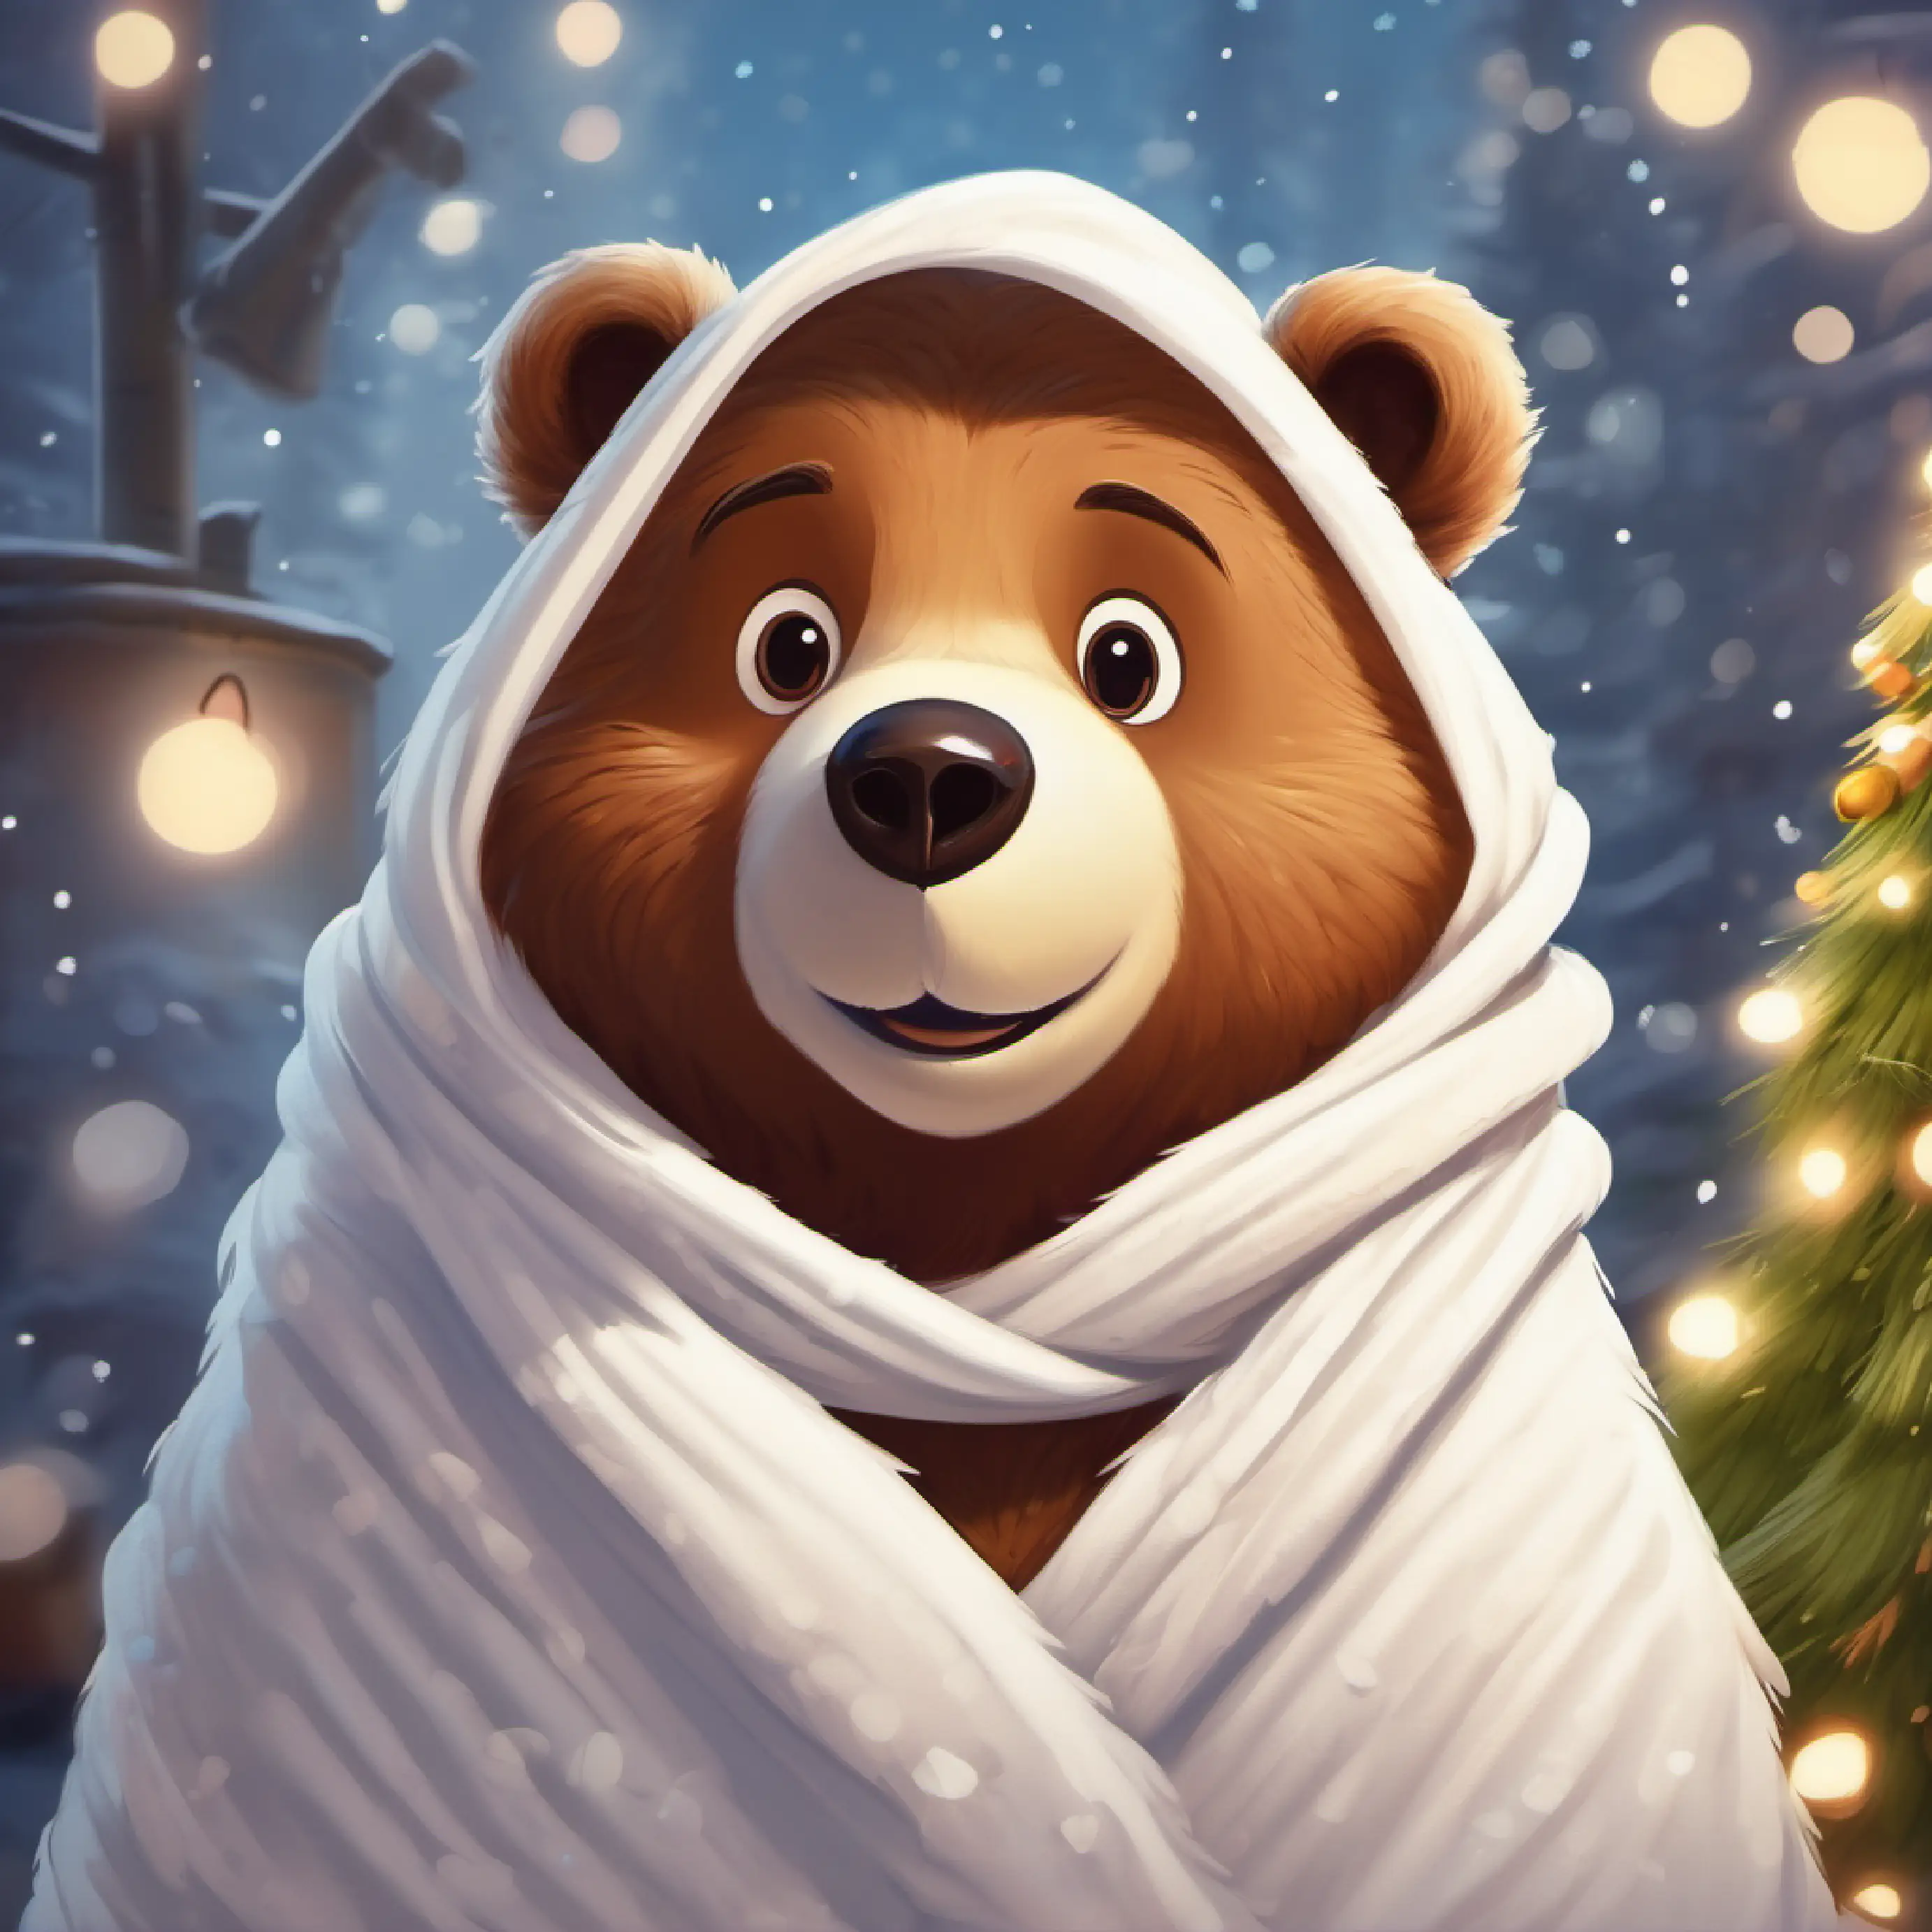 Snoody the bear wraped in white towel, feeling happy